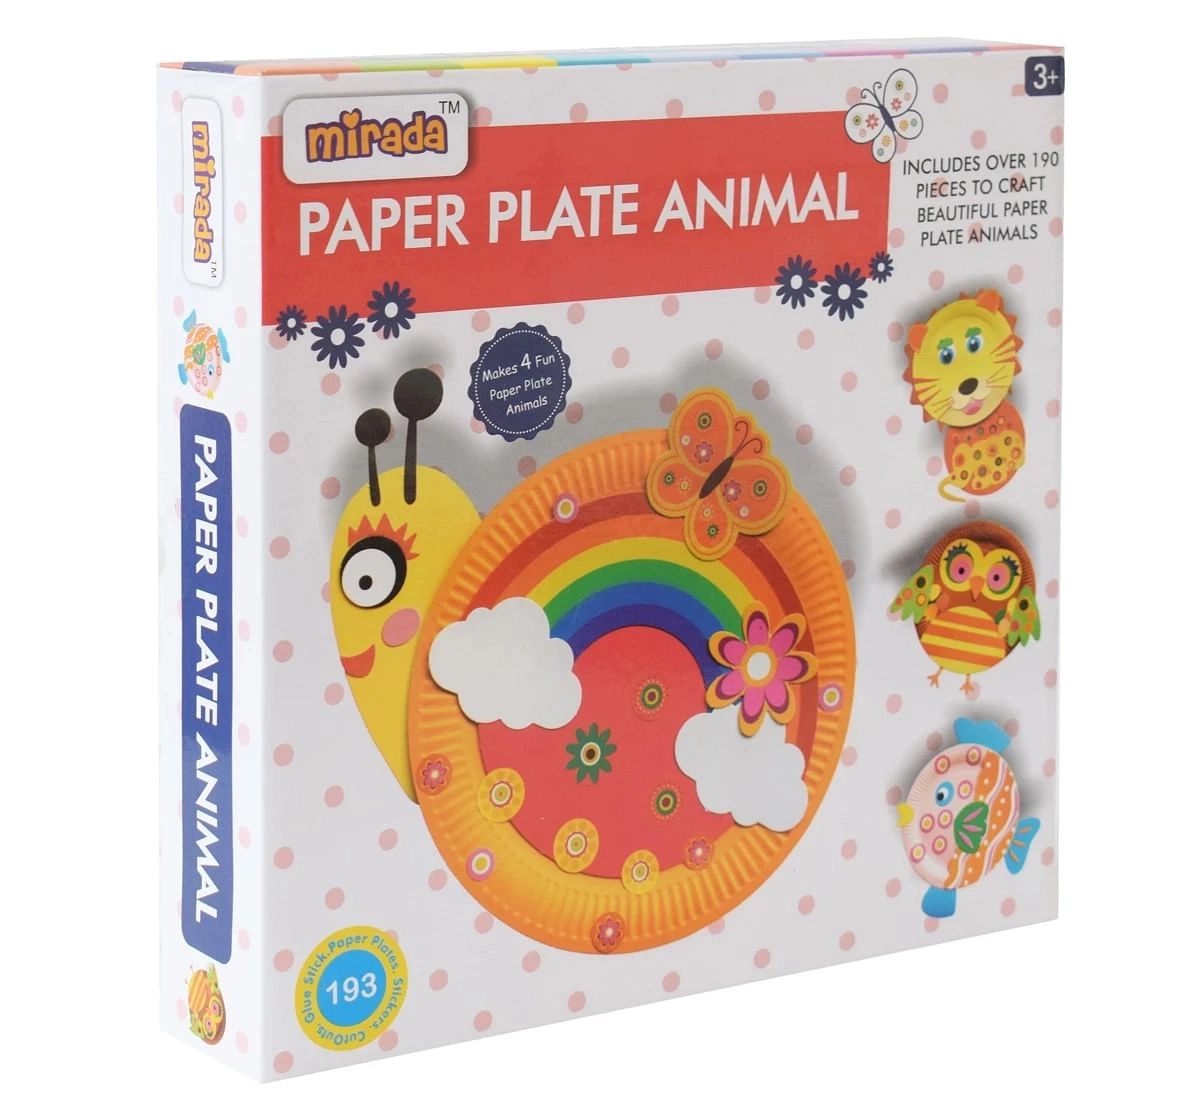 Art Craft Gift for Kids - 12 Paper Plate Art Kit Toy for 3, 4, 5 Year Old  Boys Girls Toddlers, DIY Animal Art Supplies For Children Preschool  Classroom/ Birthday/ Party Favor/ Christmas Game Crafts